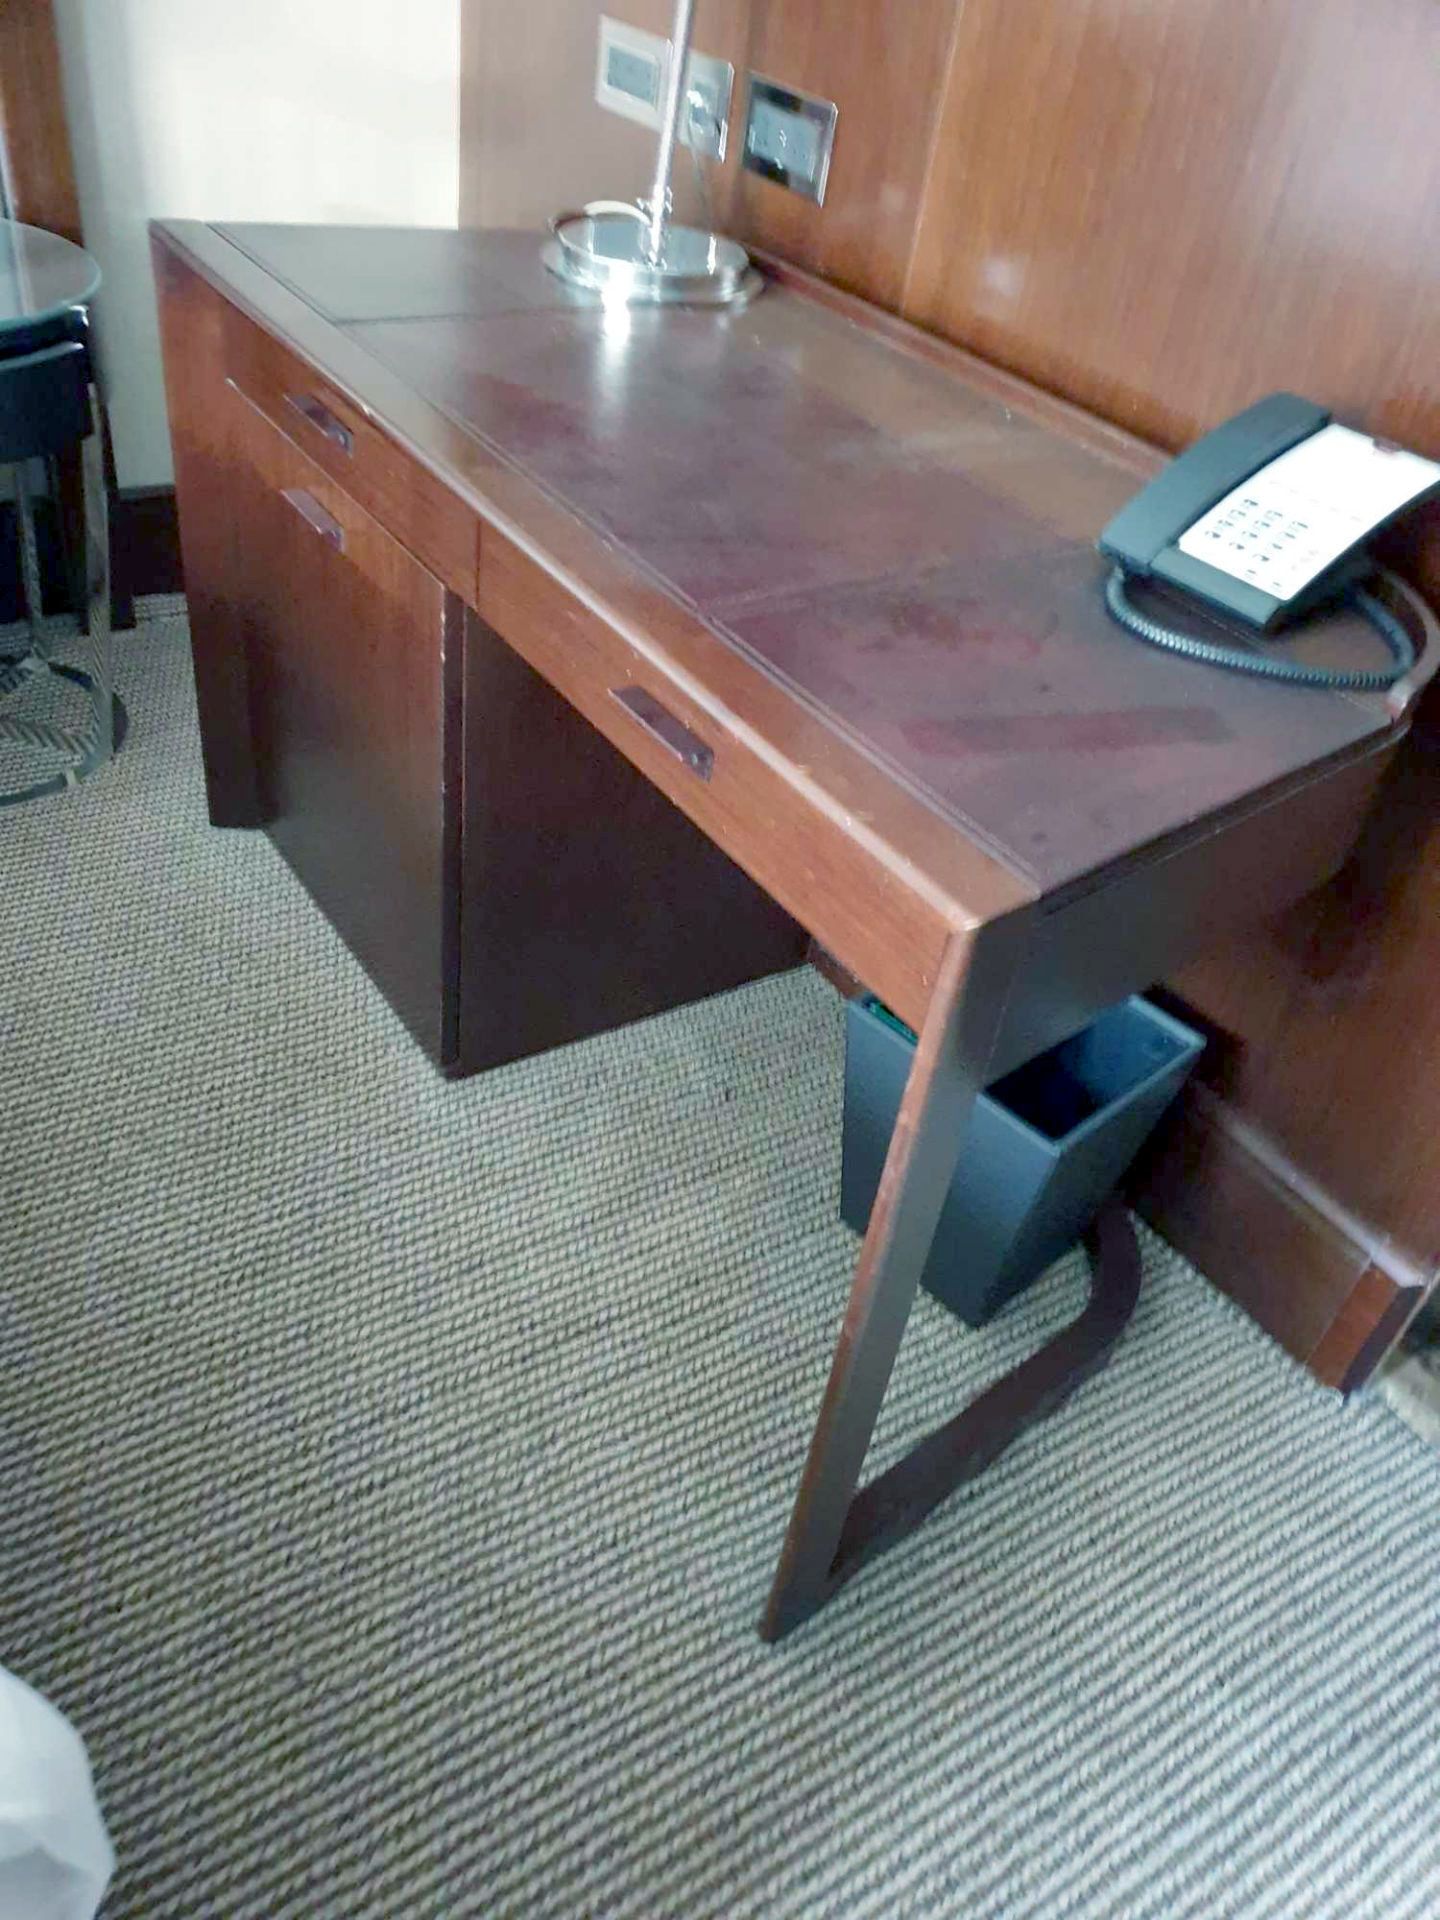 Walnut Veneer Desk By David Salmon With Fitted Drawer And cupboard Fitted With Dometic Minibar Hipro - Image 2 of 2